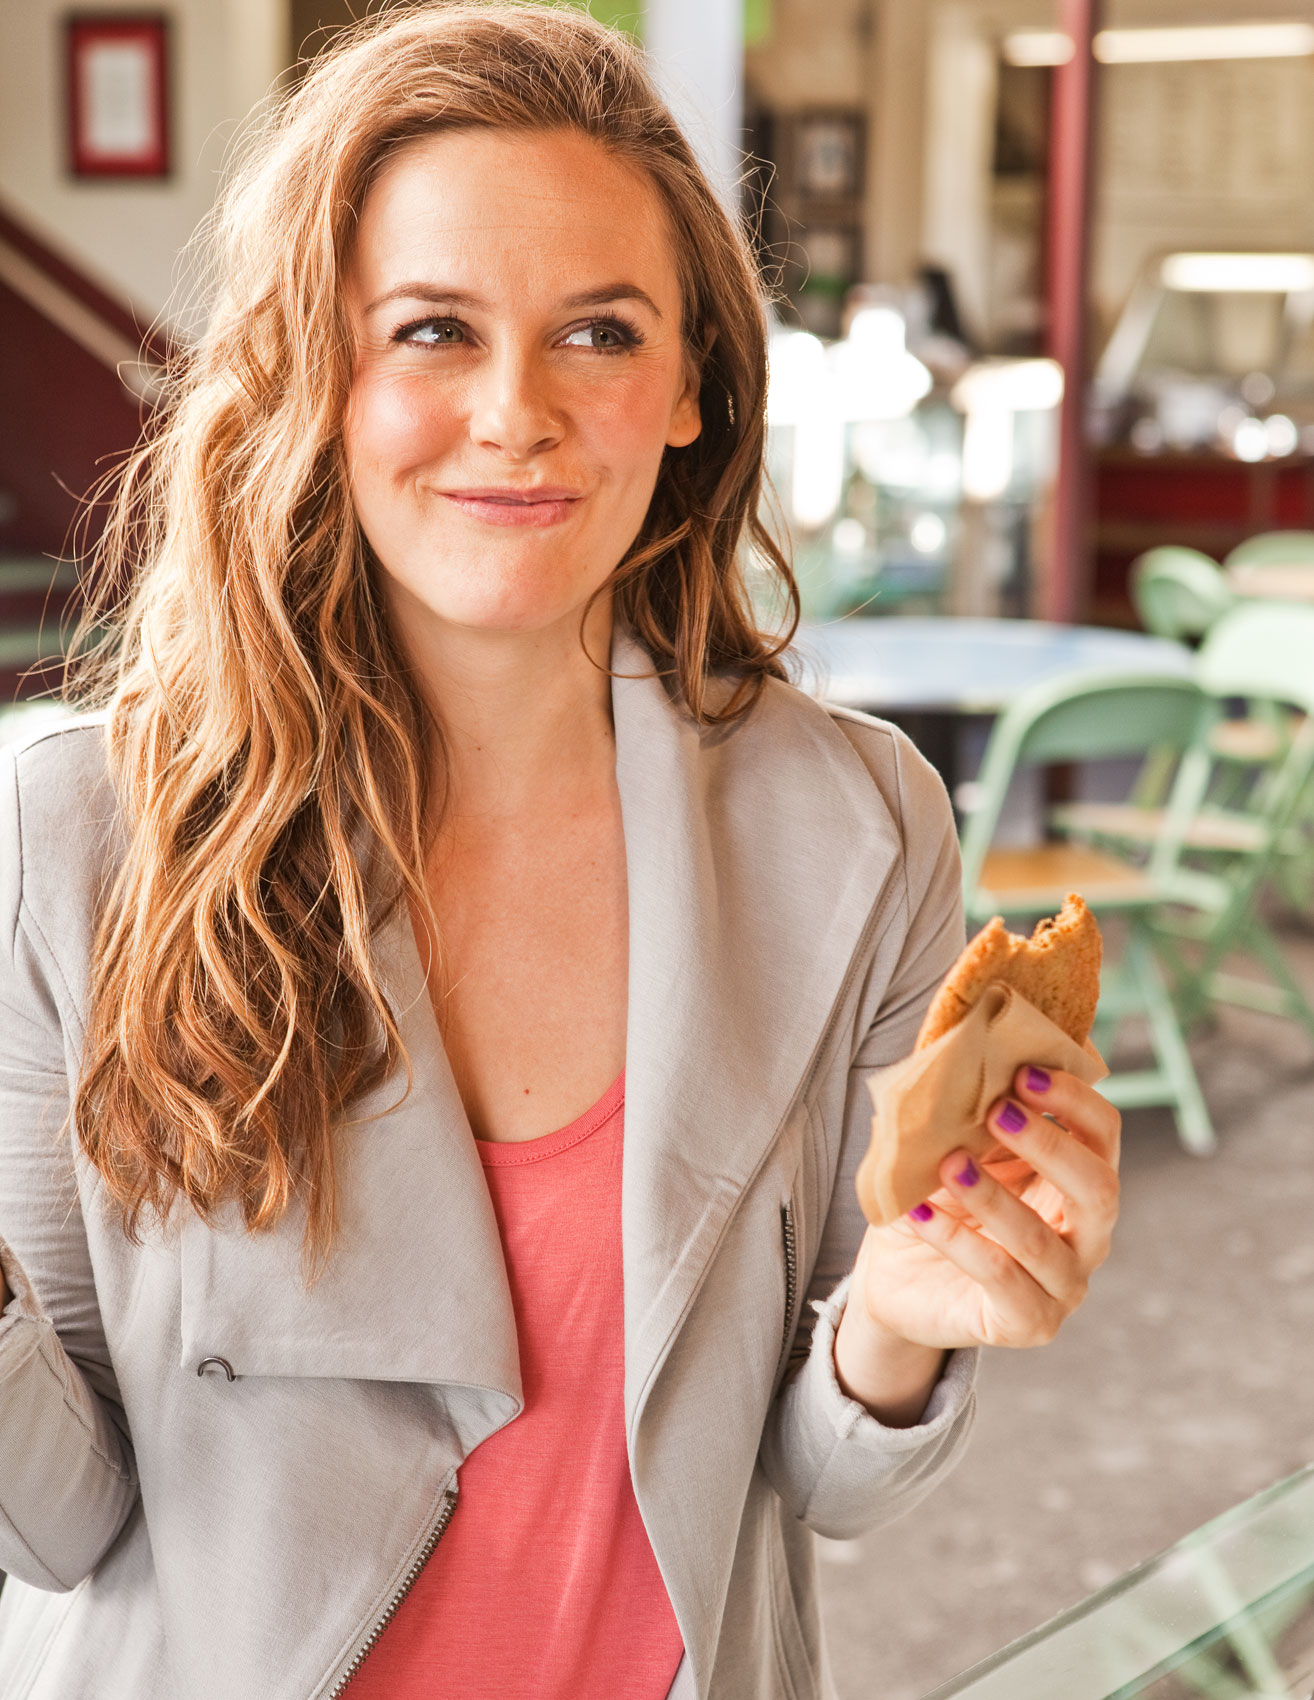 Celebrity Portrait of Alicia Silverstone for a magazine editorial at the Los Angeles Farmers Market by Portrait and Lifestyle Photographer Michael Weschler.